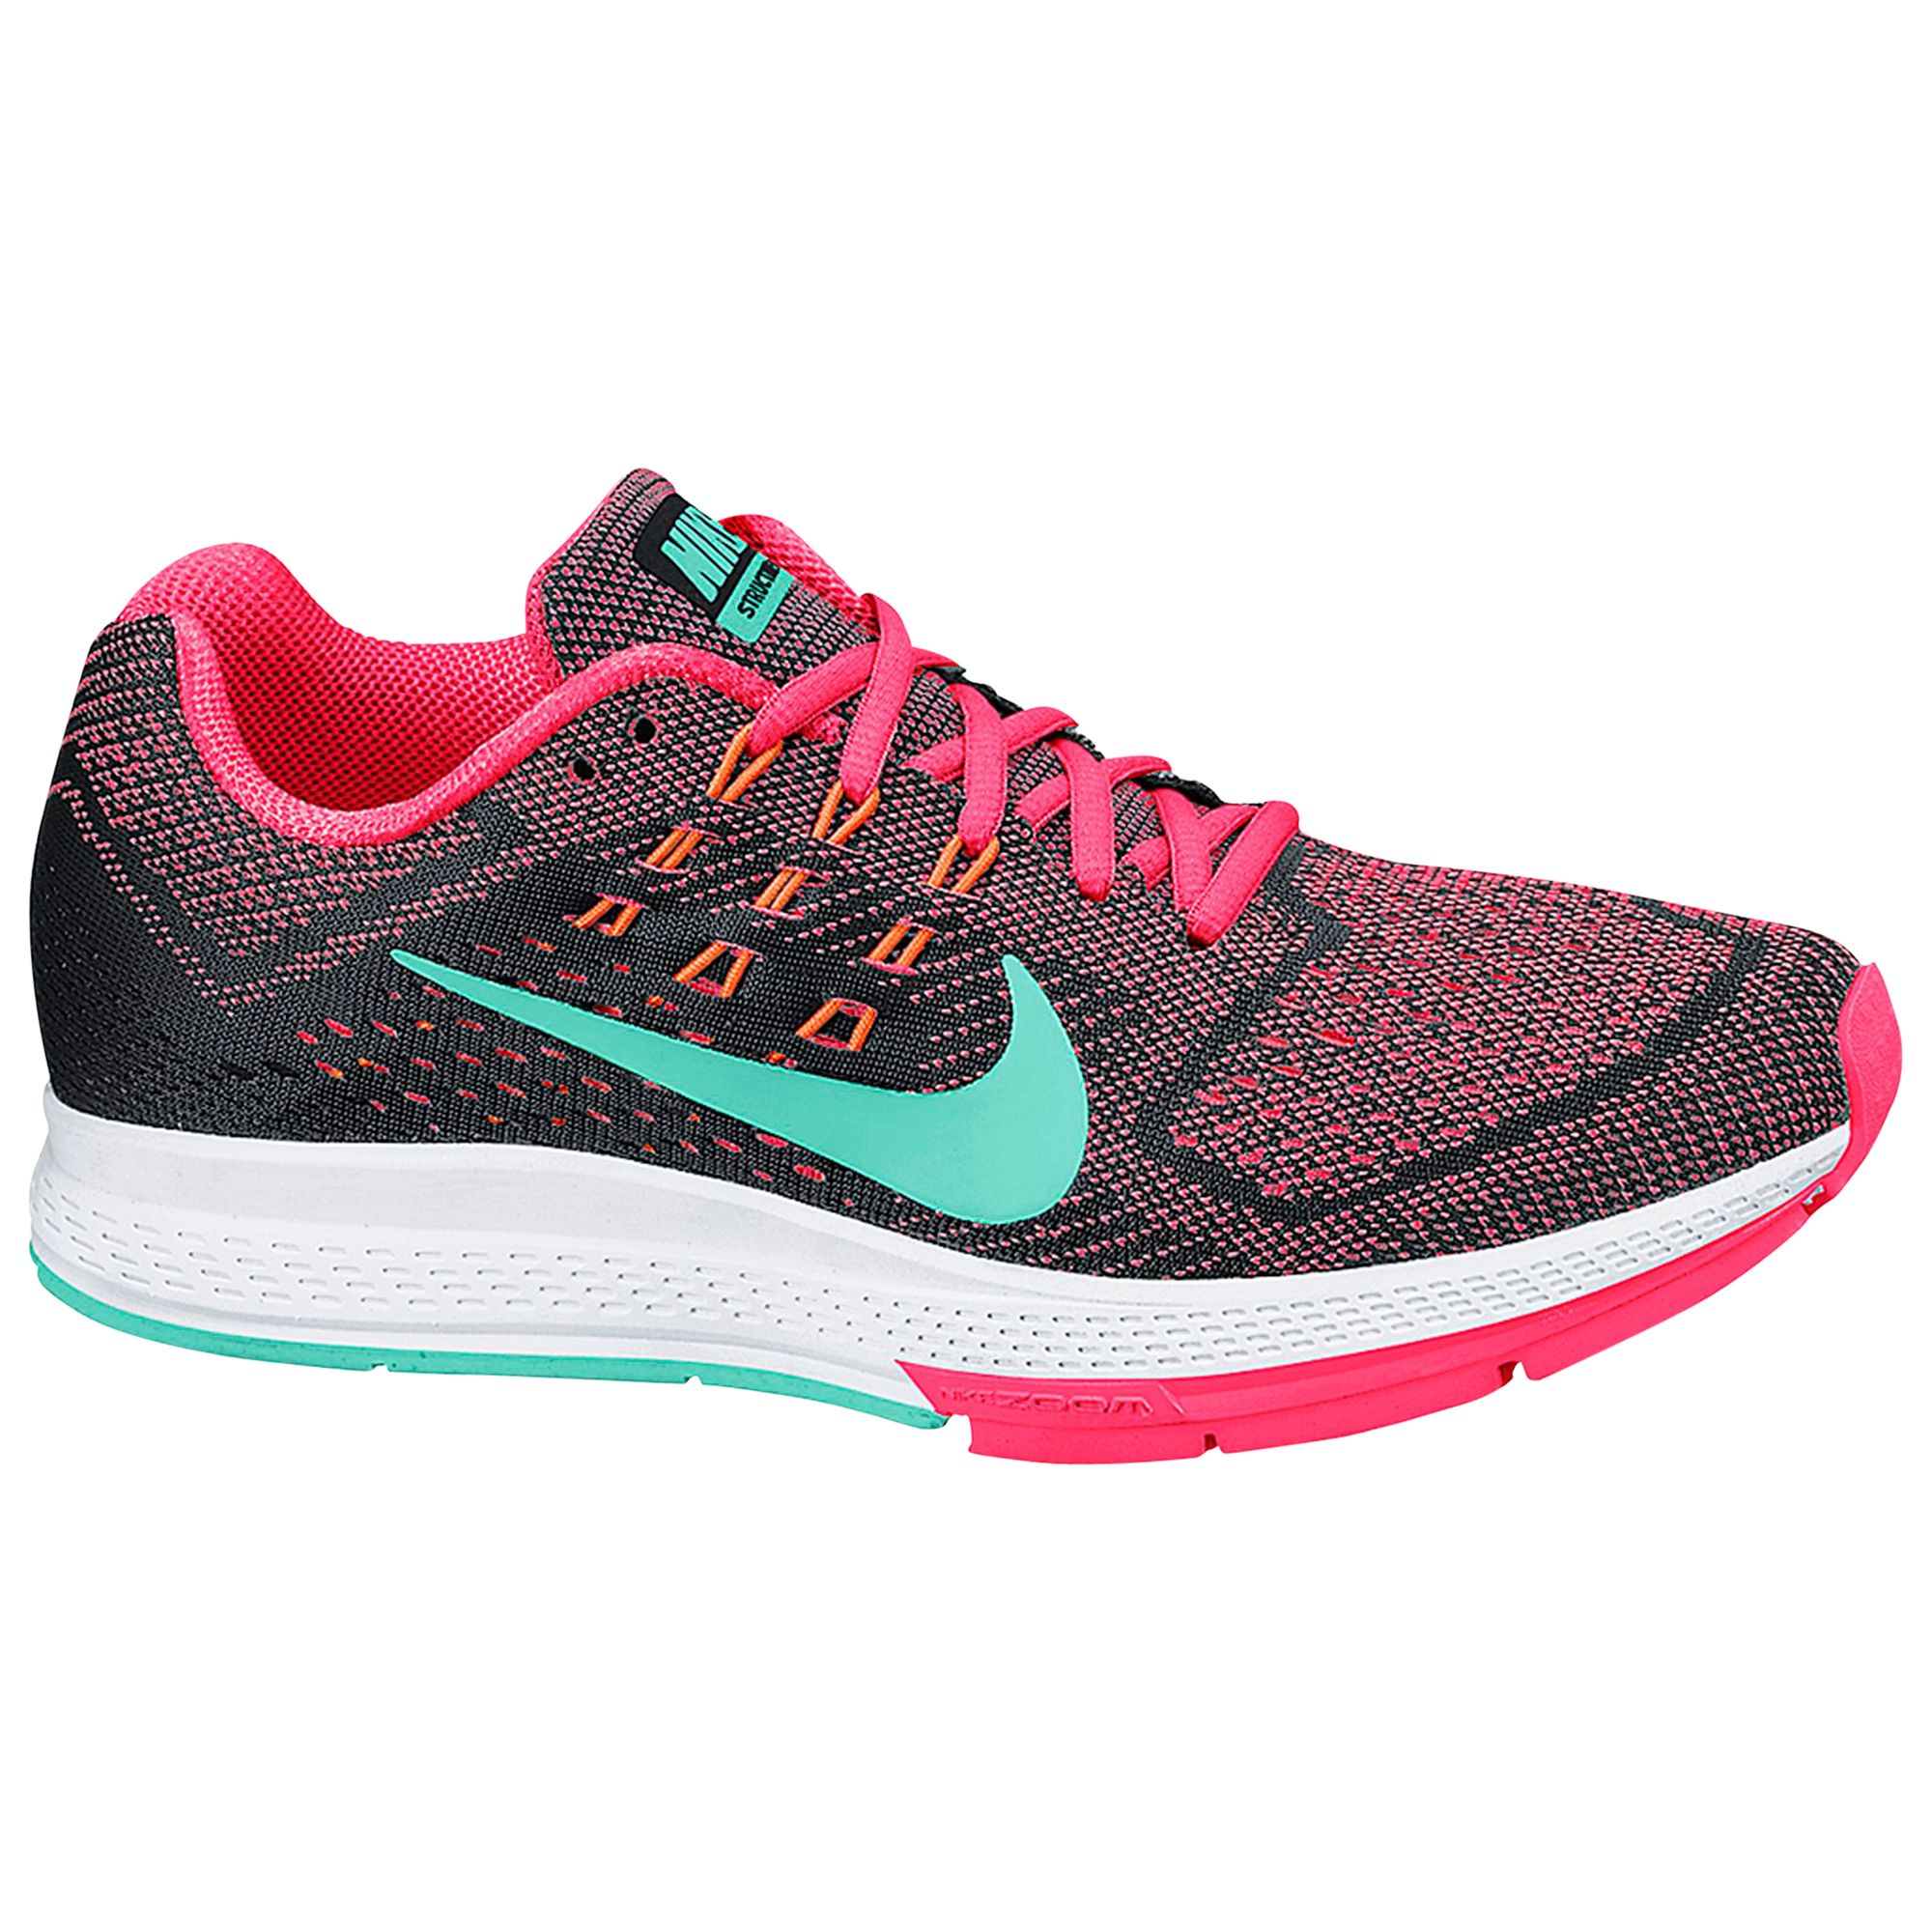 Nike Air Zoom Structure 18 Women's Running Shoes